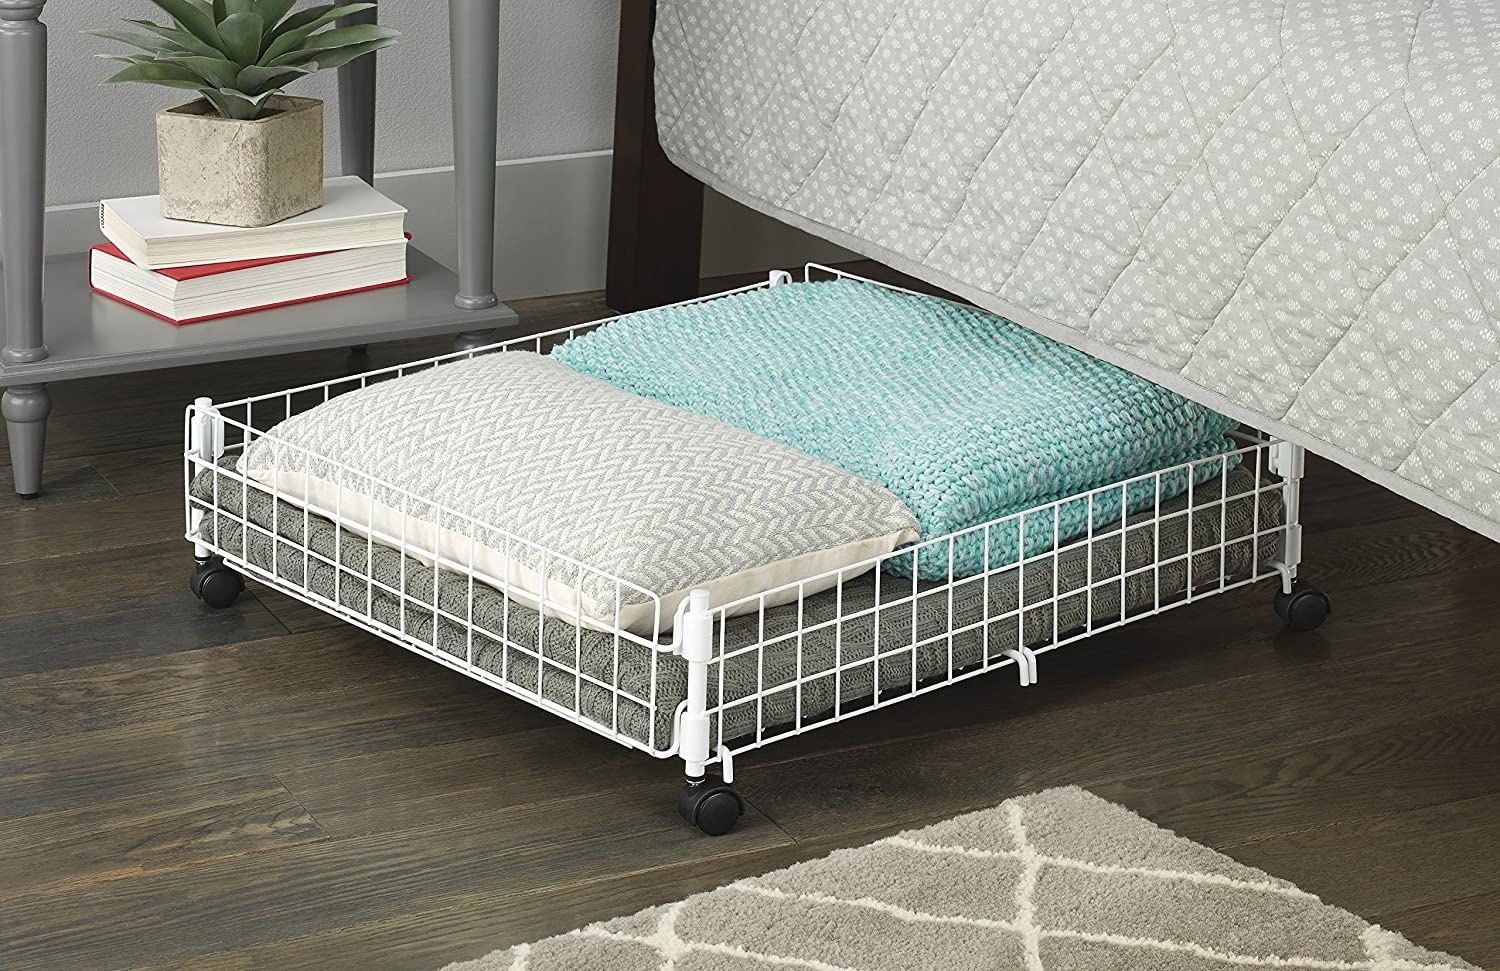 The wheeled basket with pillows and blankets under a bed 